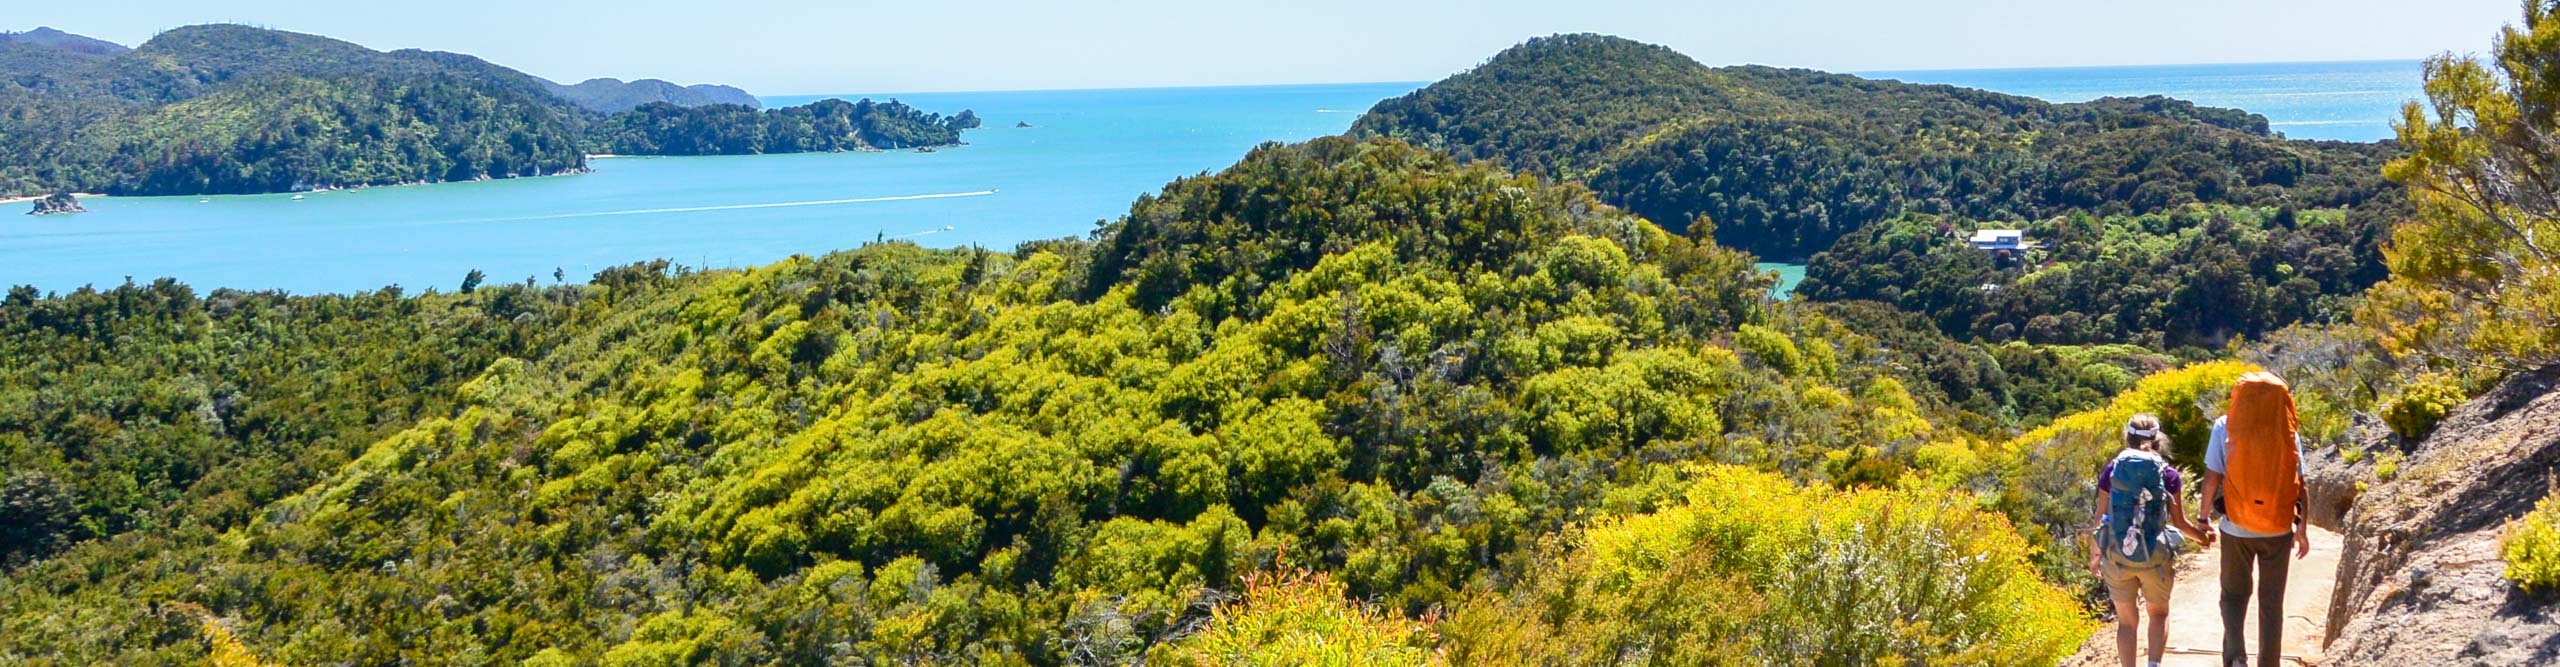 People hiking down a path in the Abel Tasman national lake, near a beach with blue water